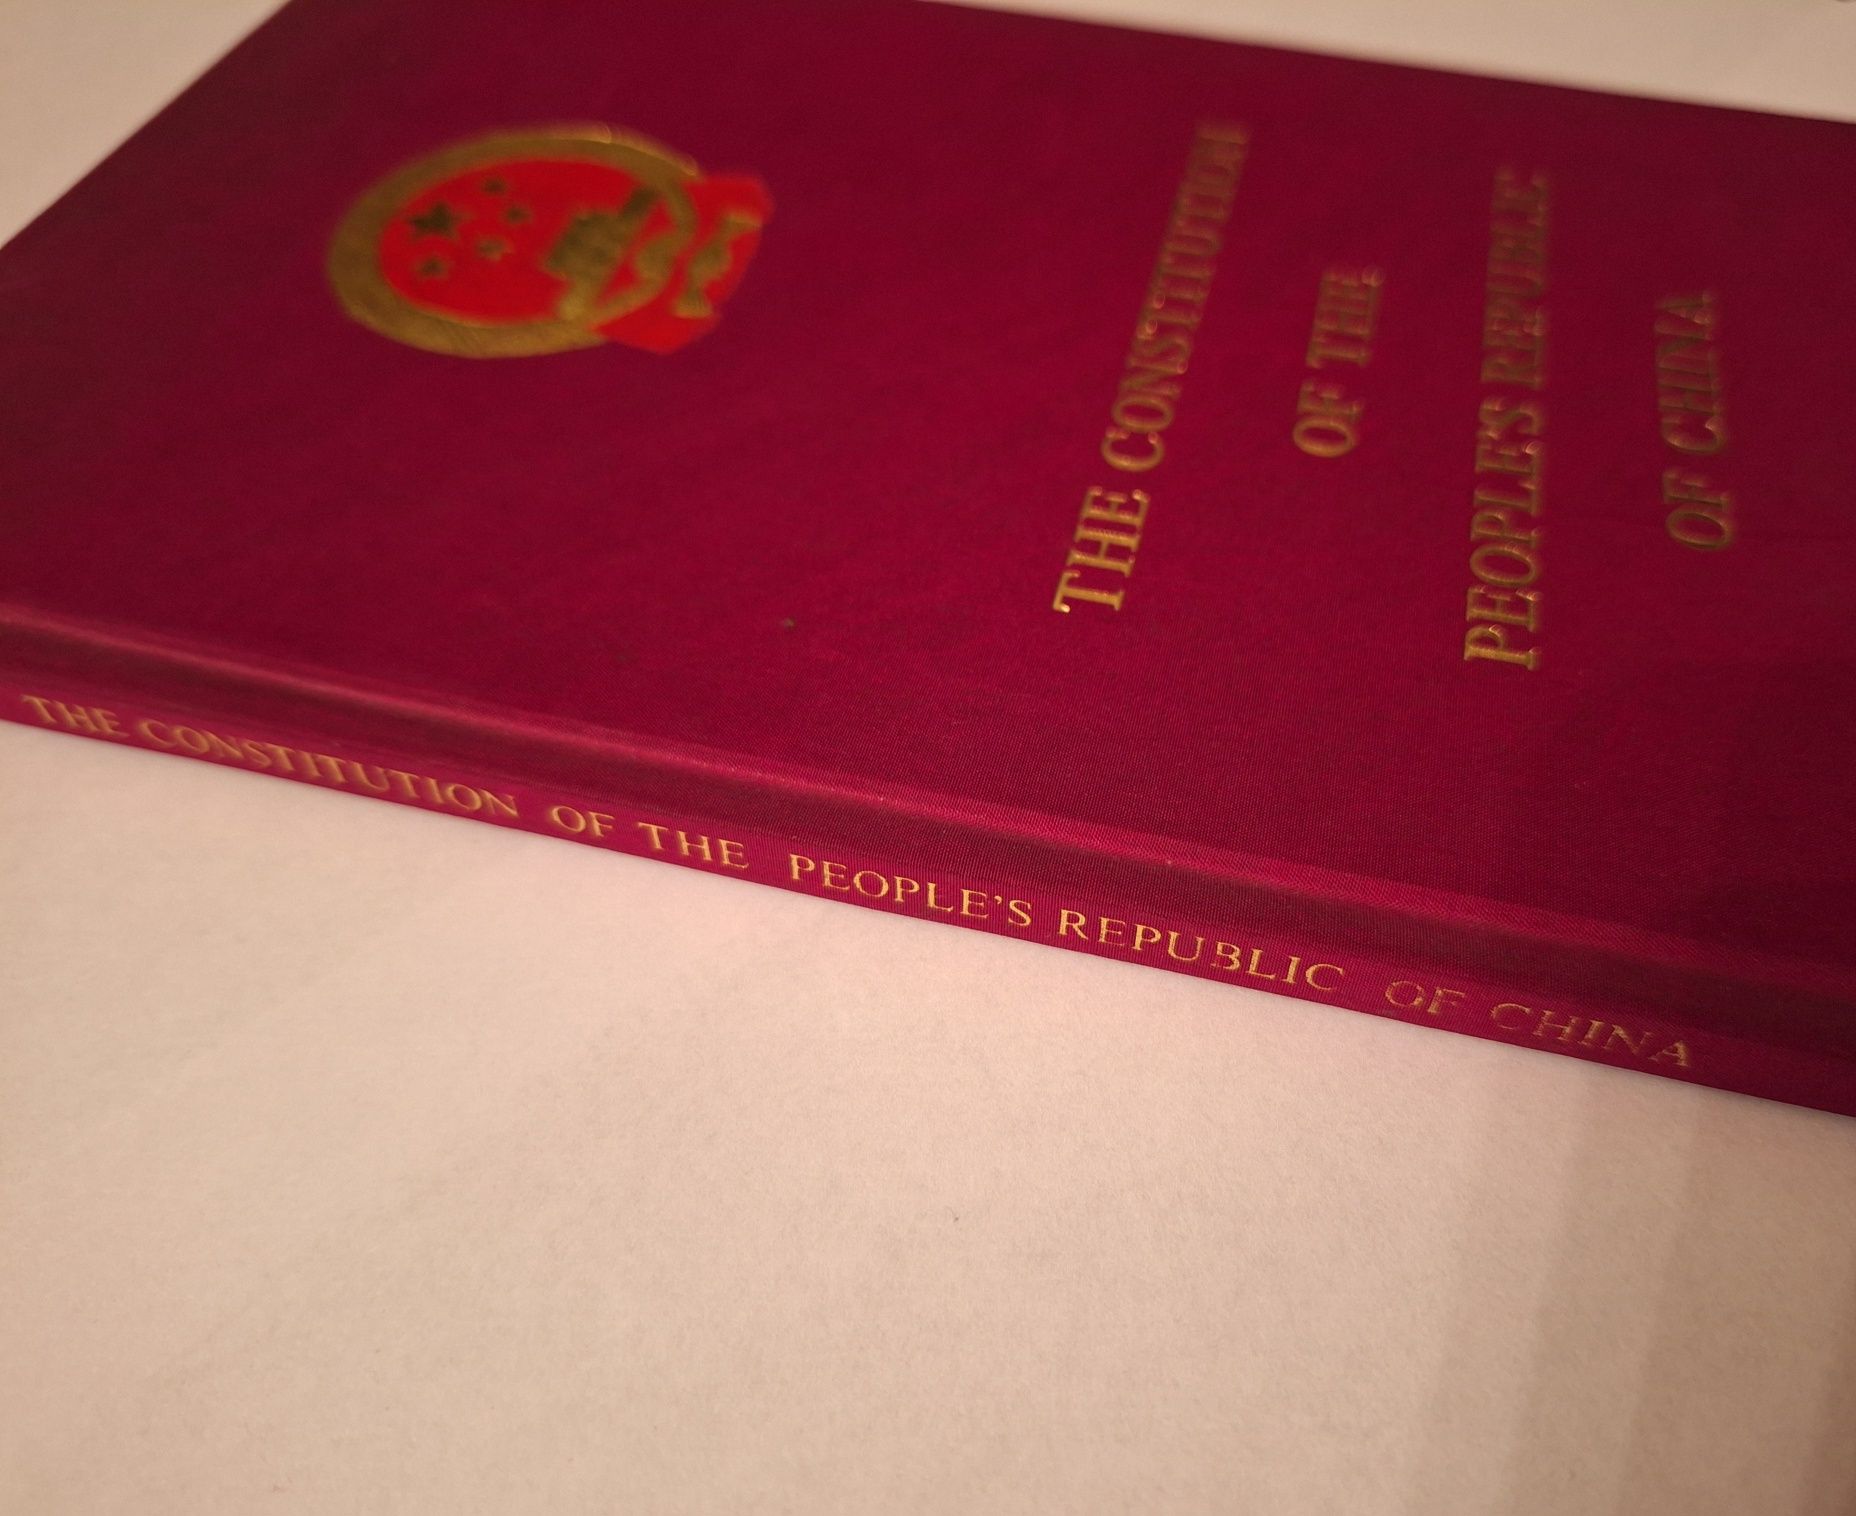 The  Constitution of The People's Republic of China,Konstytucja 1978 r